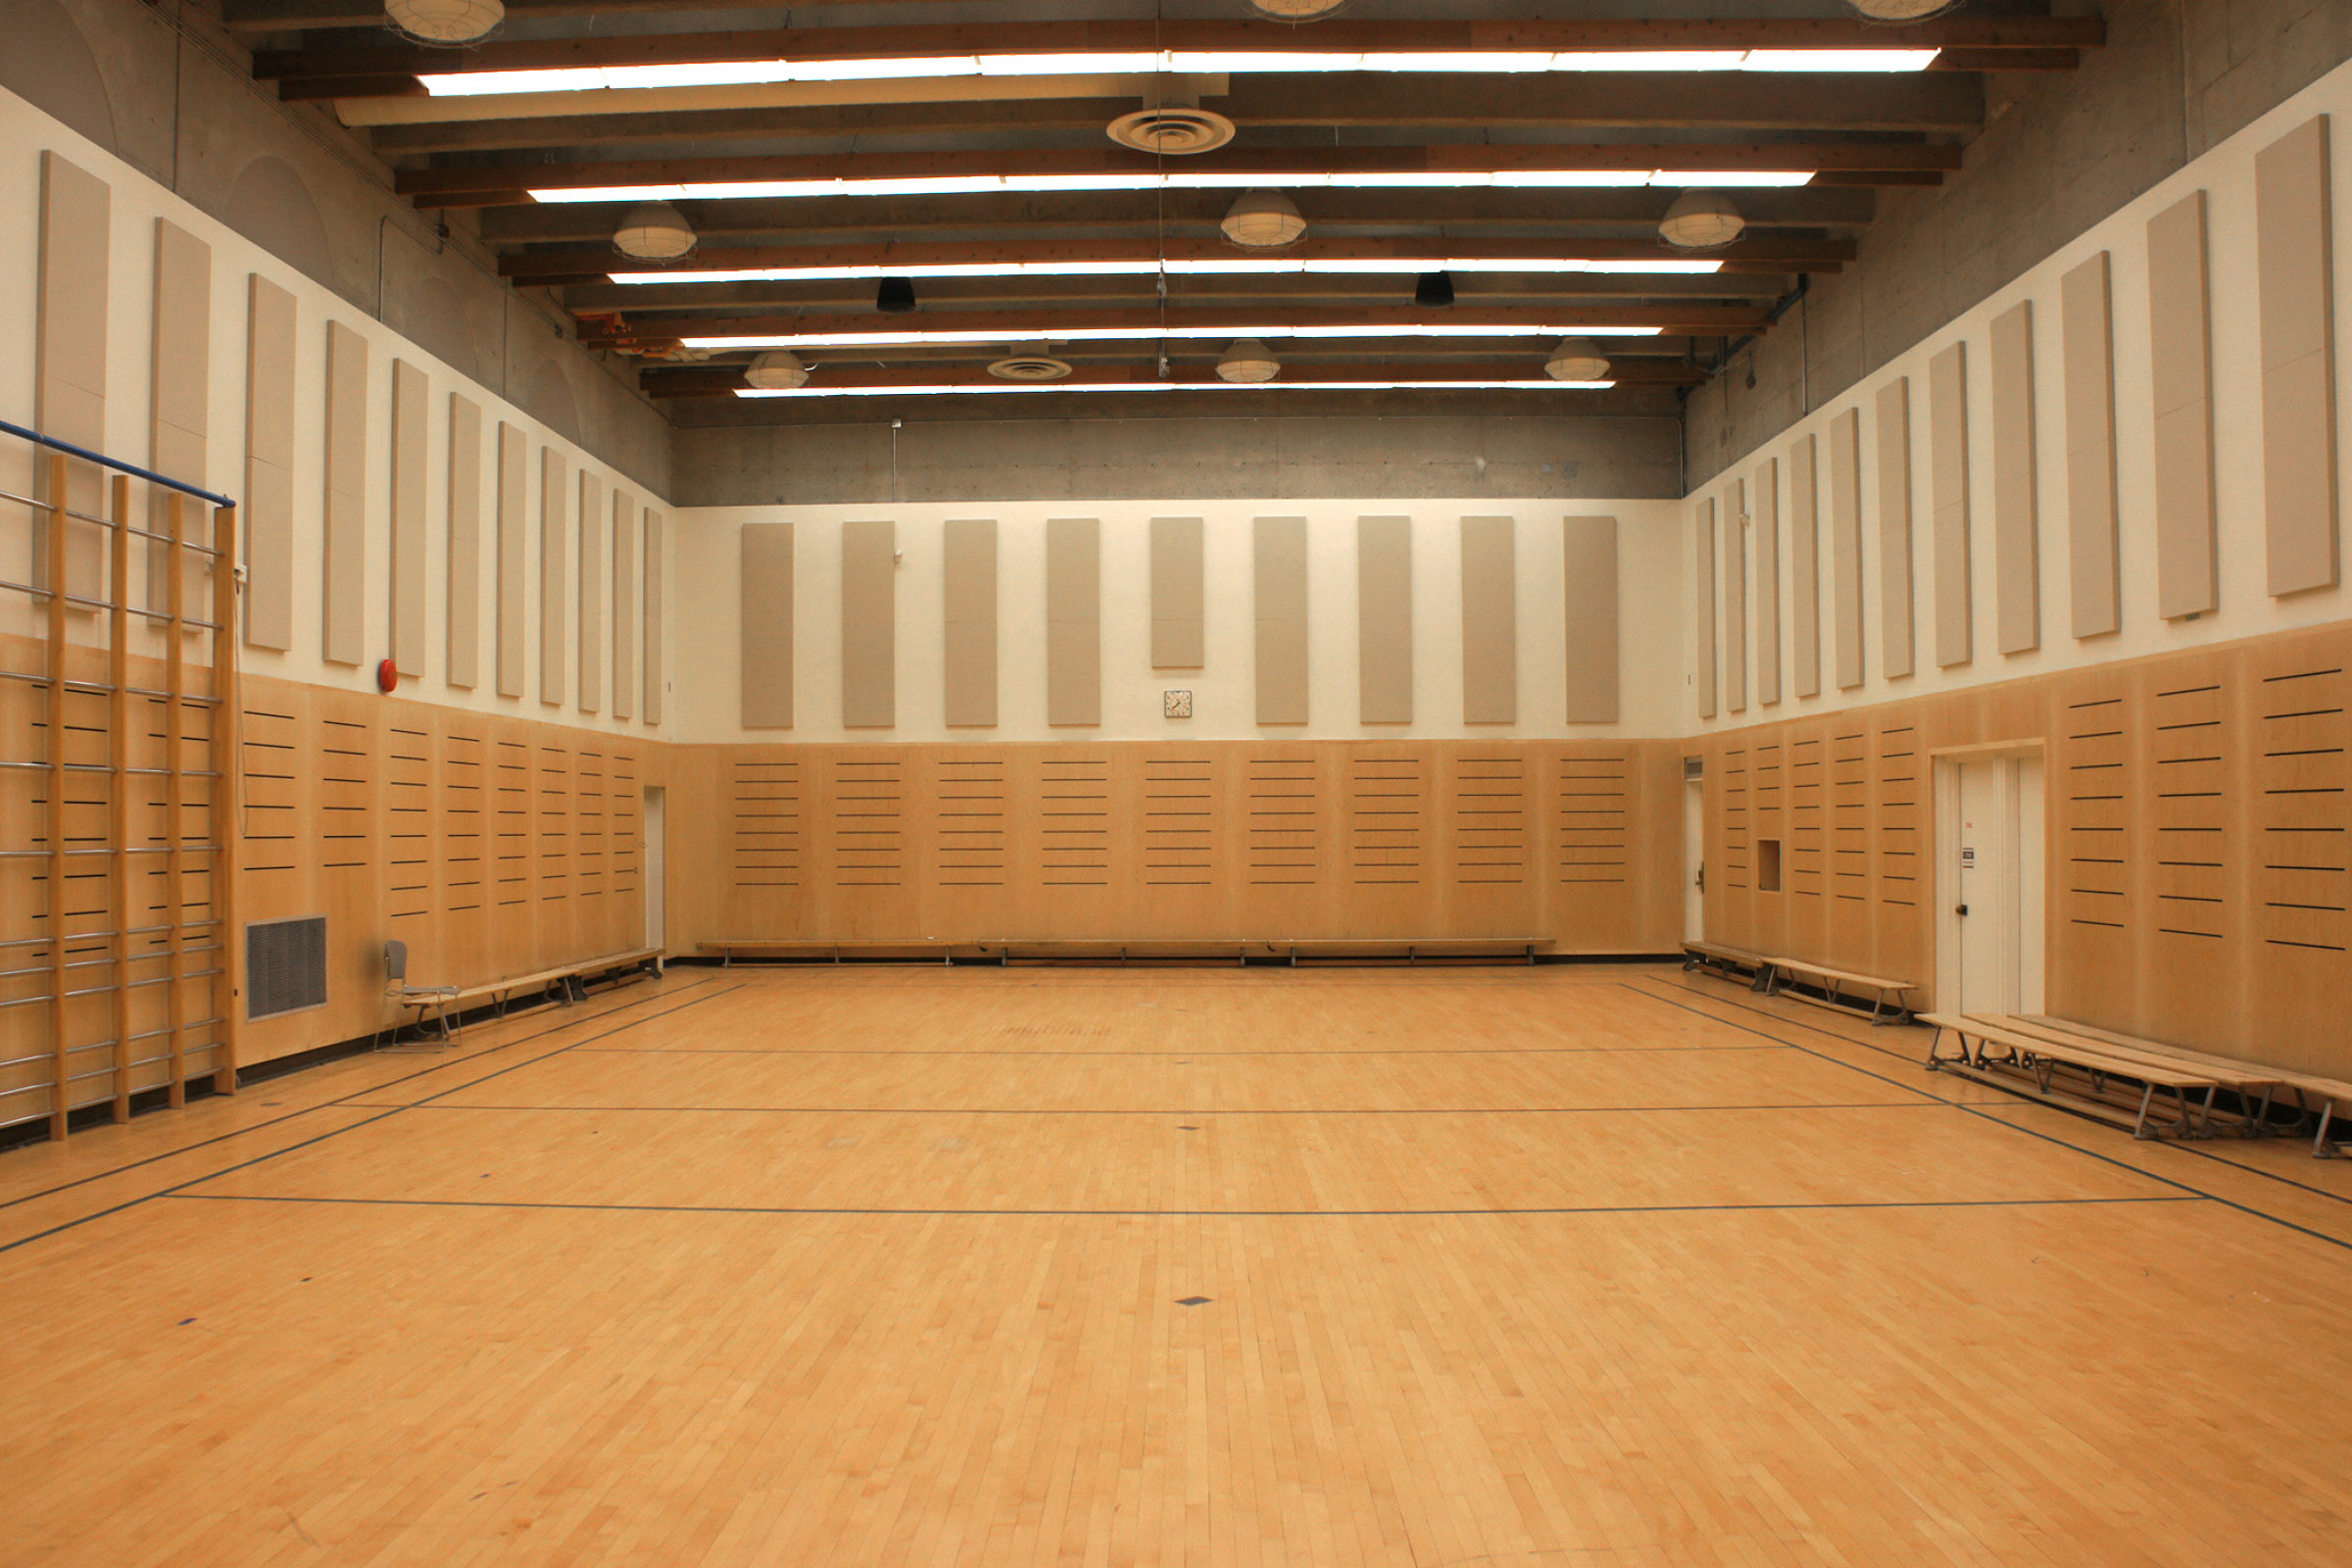 Primacoustic Hercules heavy duty acoustic panels in a sports hall